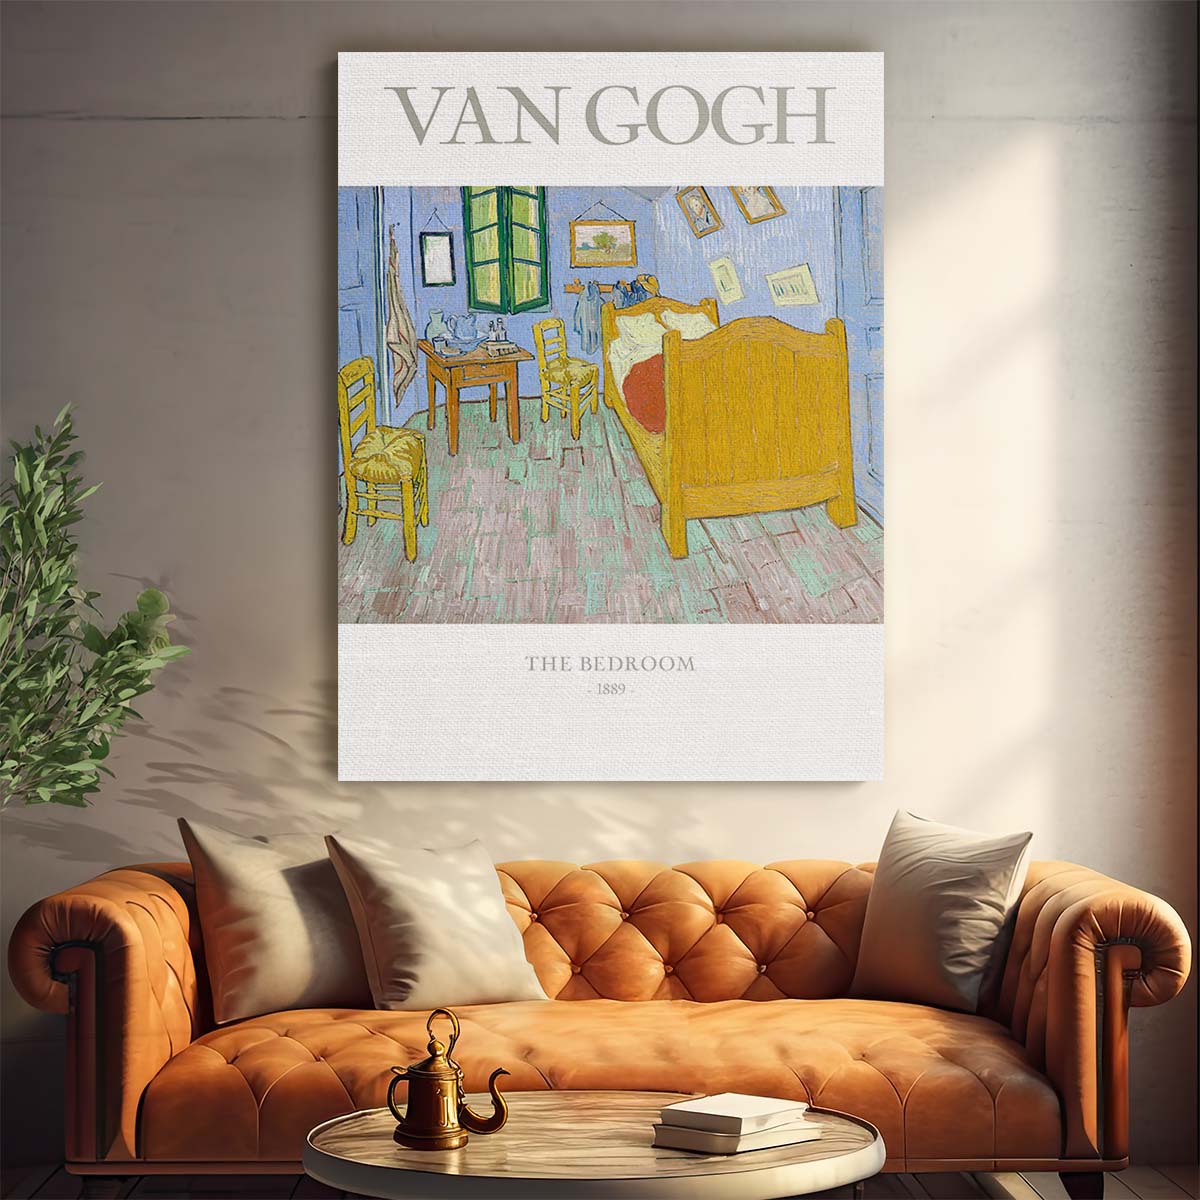 Van Gogh's Master Oil Painting 'The Bedroom' 1889 - Acrylic Blue Wall Art by Luxuriance Designs, made in USA